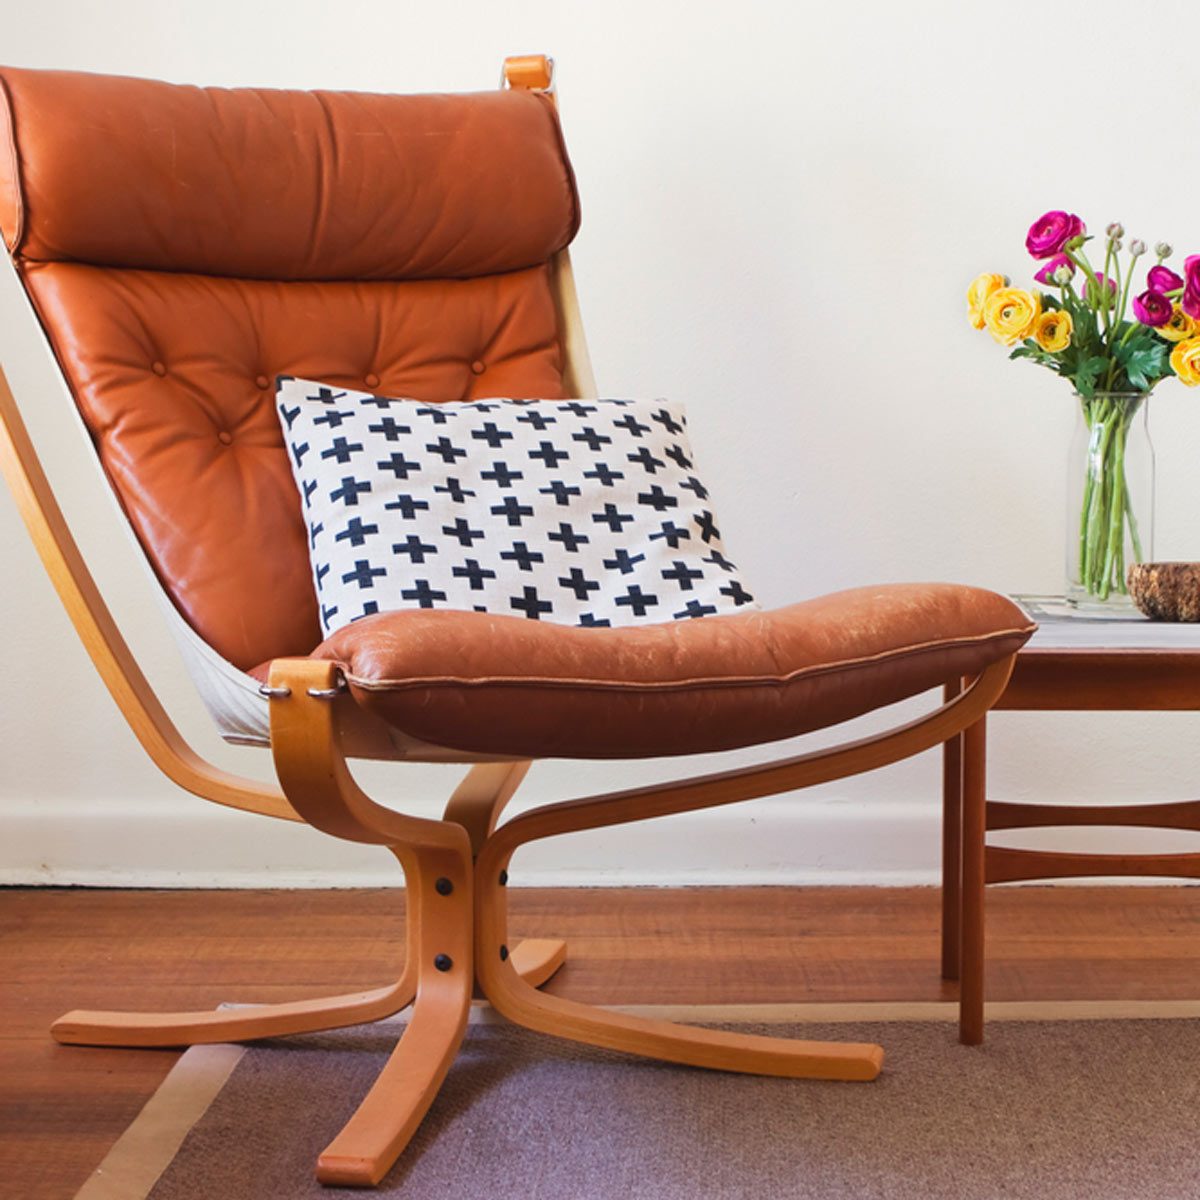 Caring For Your Indoor Teak Furniture: Tips And Tricks To Keep It Looking New